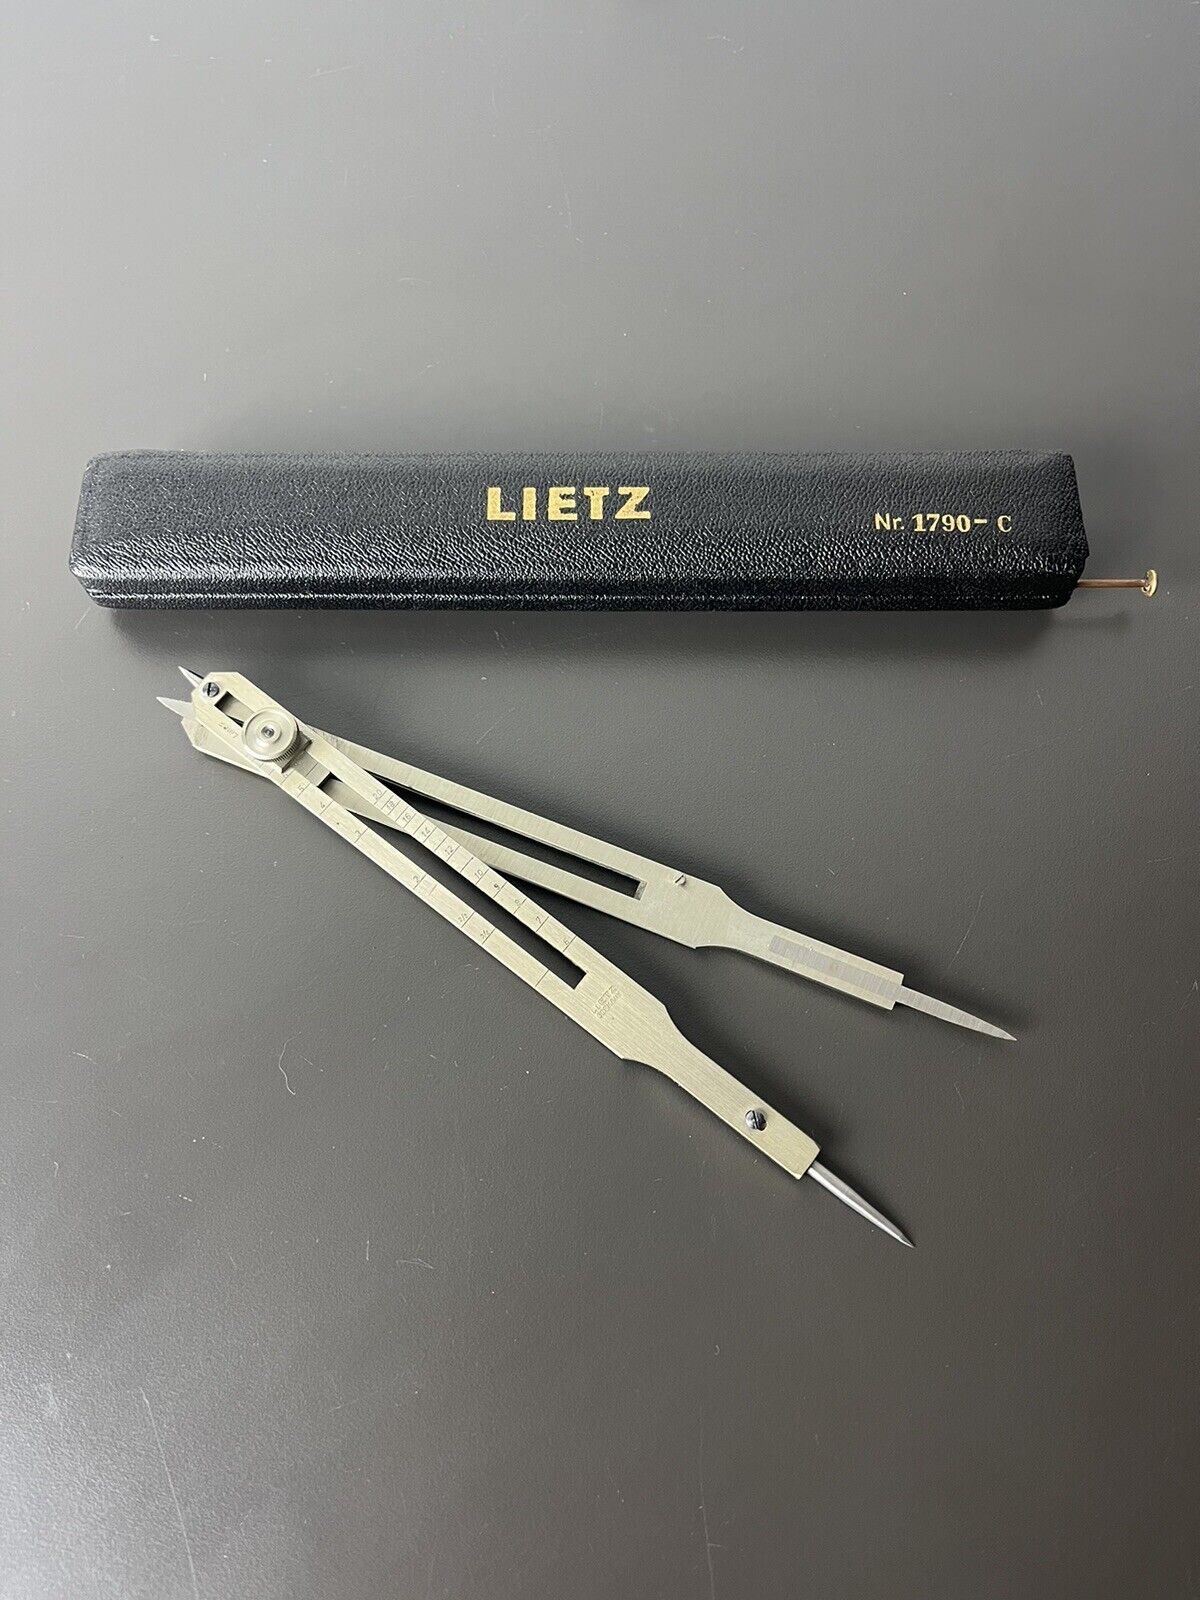 Vintage The Lietz Company Compass 1790-C Drafting With Case Made in Germany